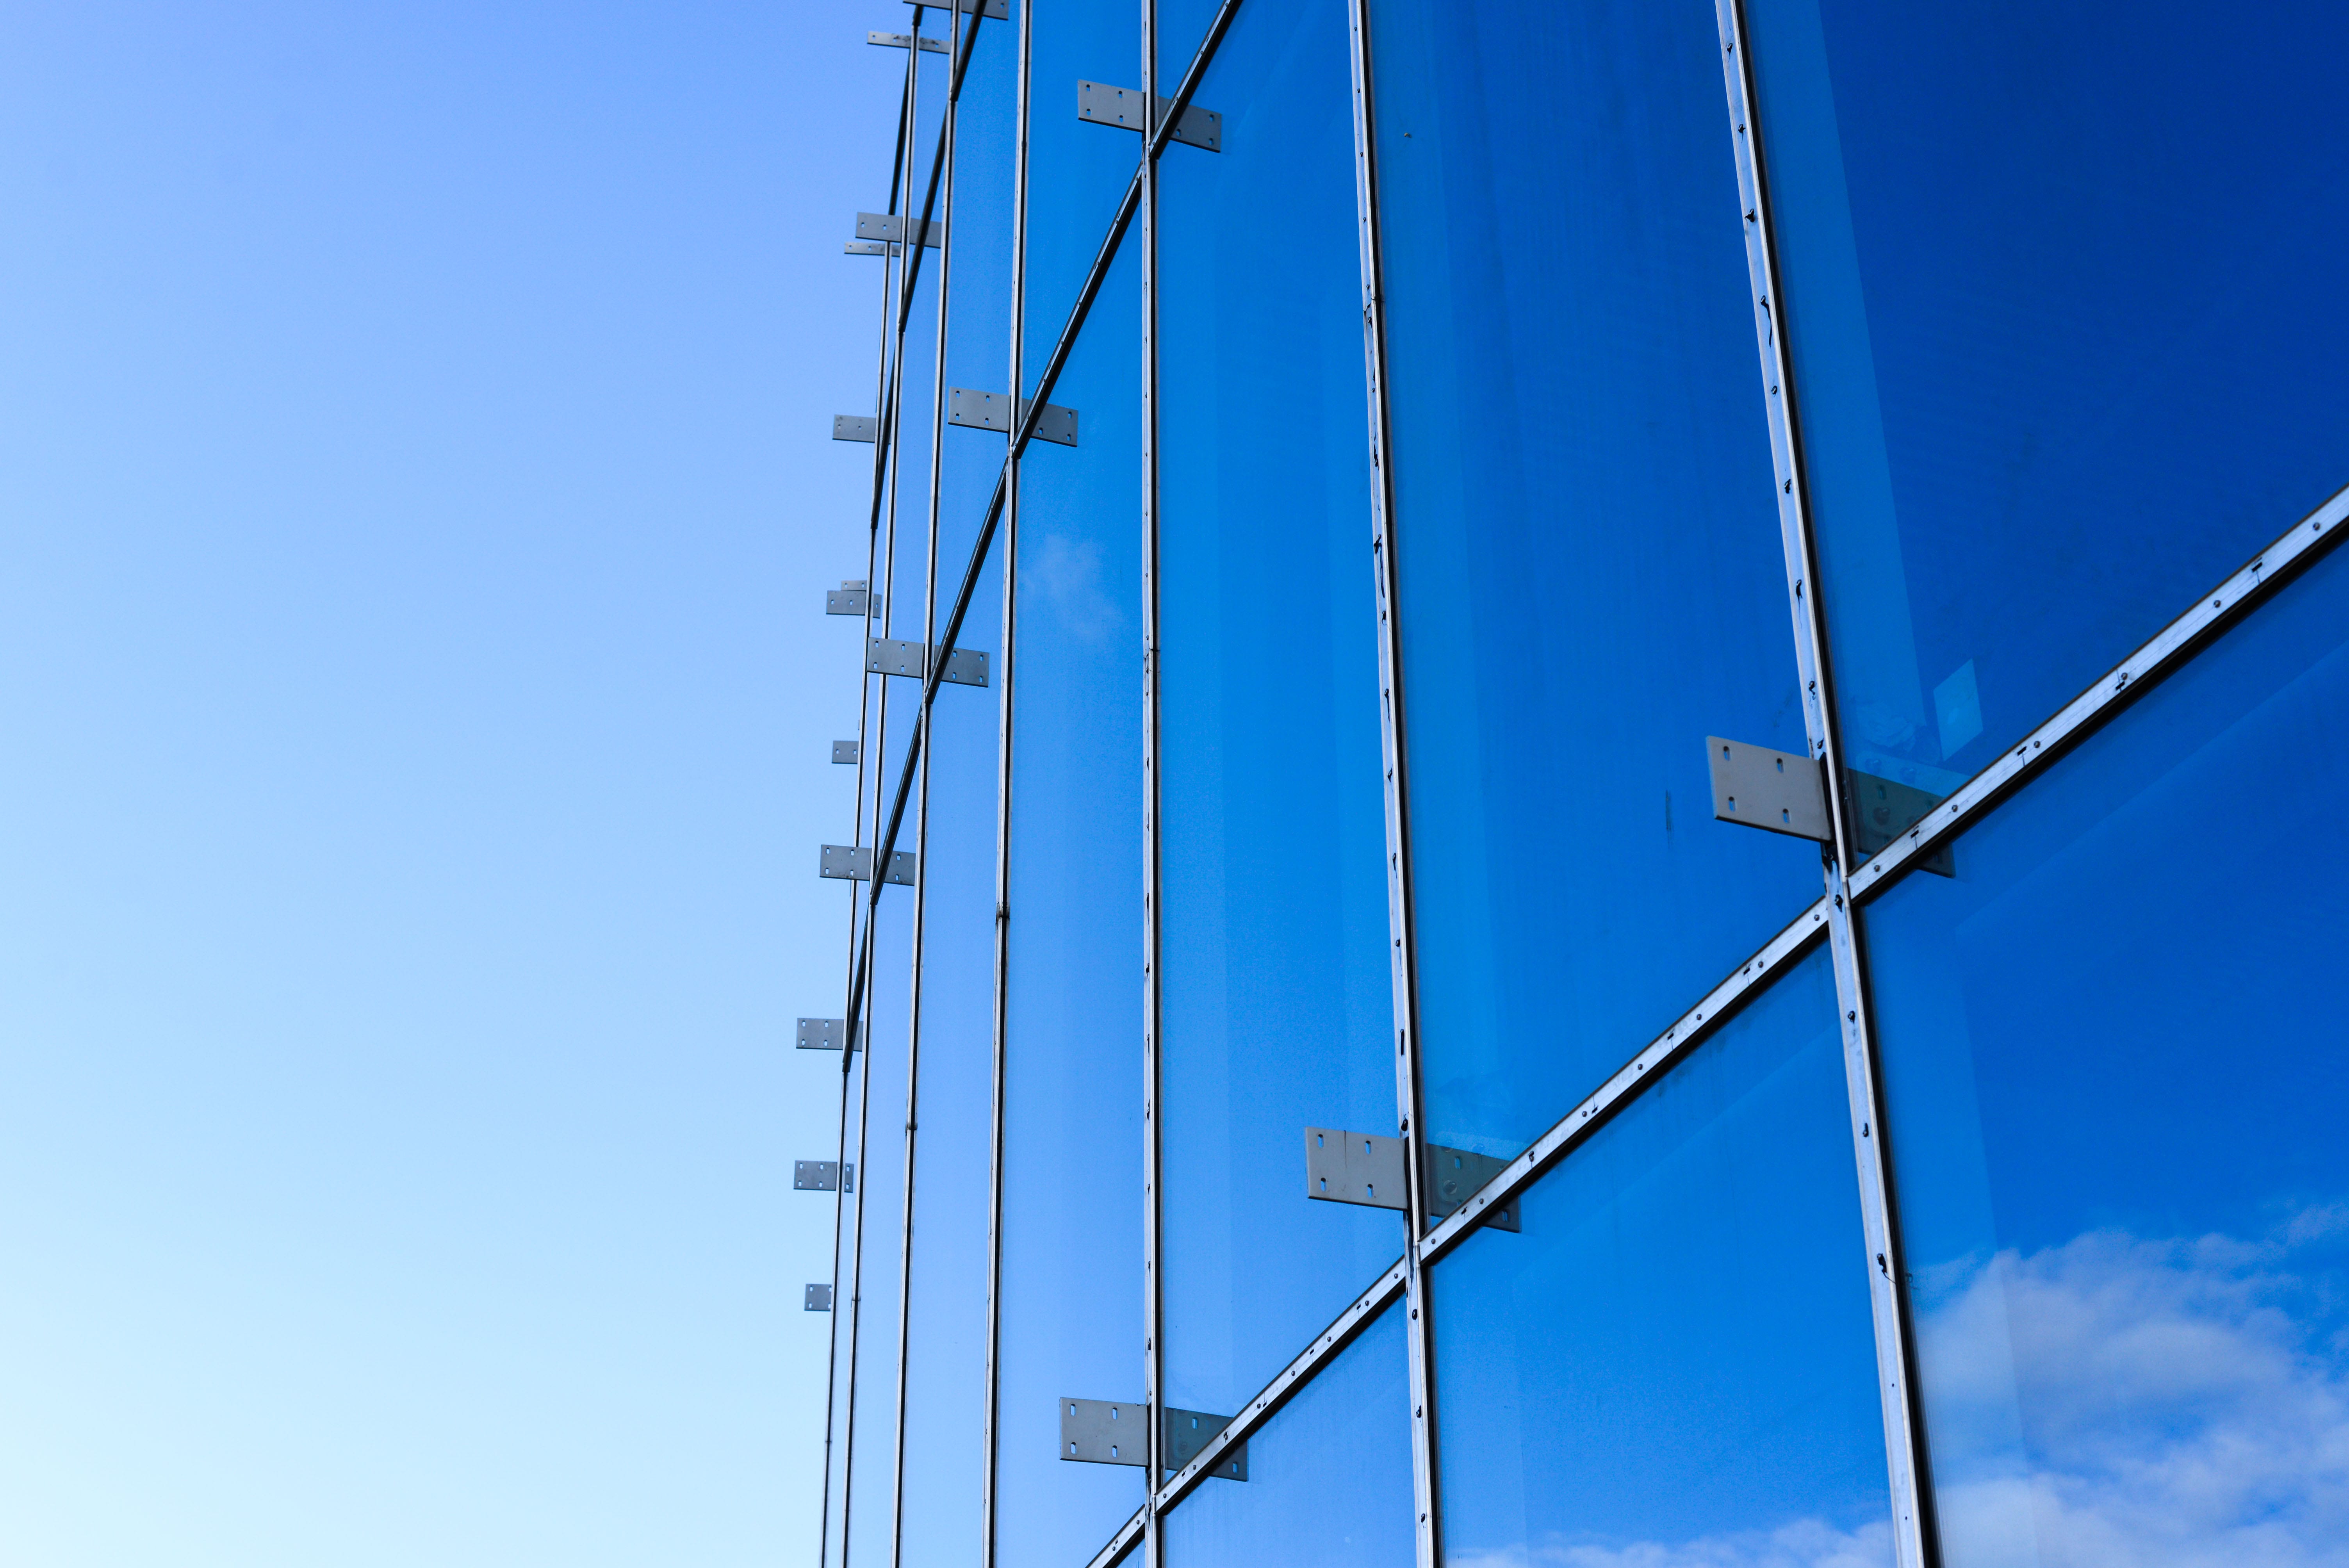 Image of large windows and a blue sky